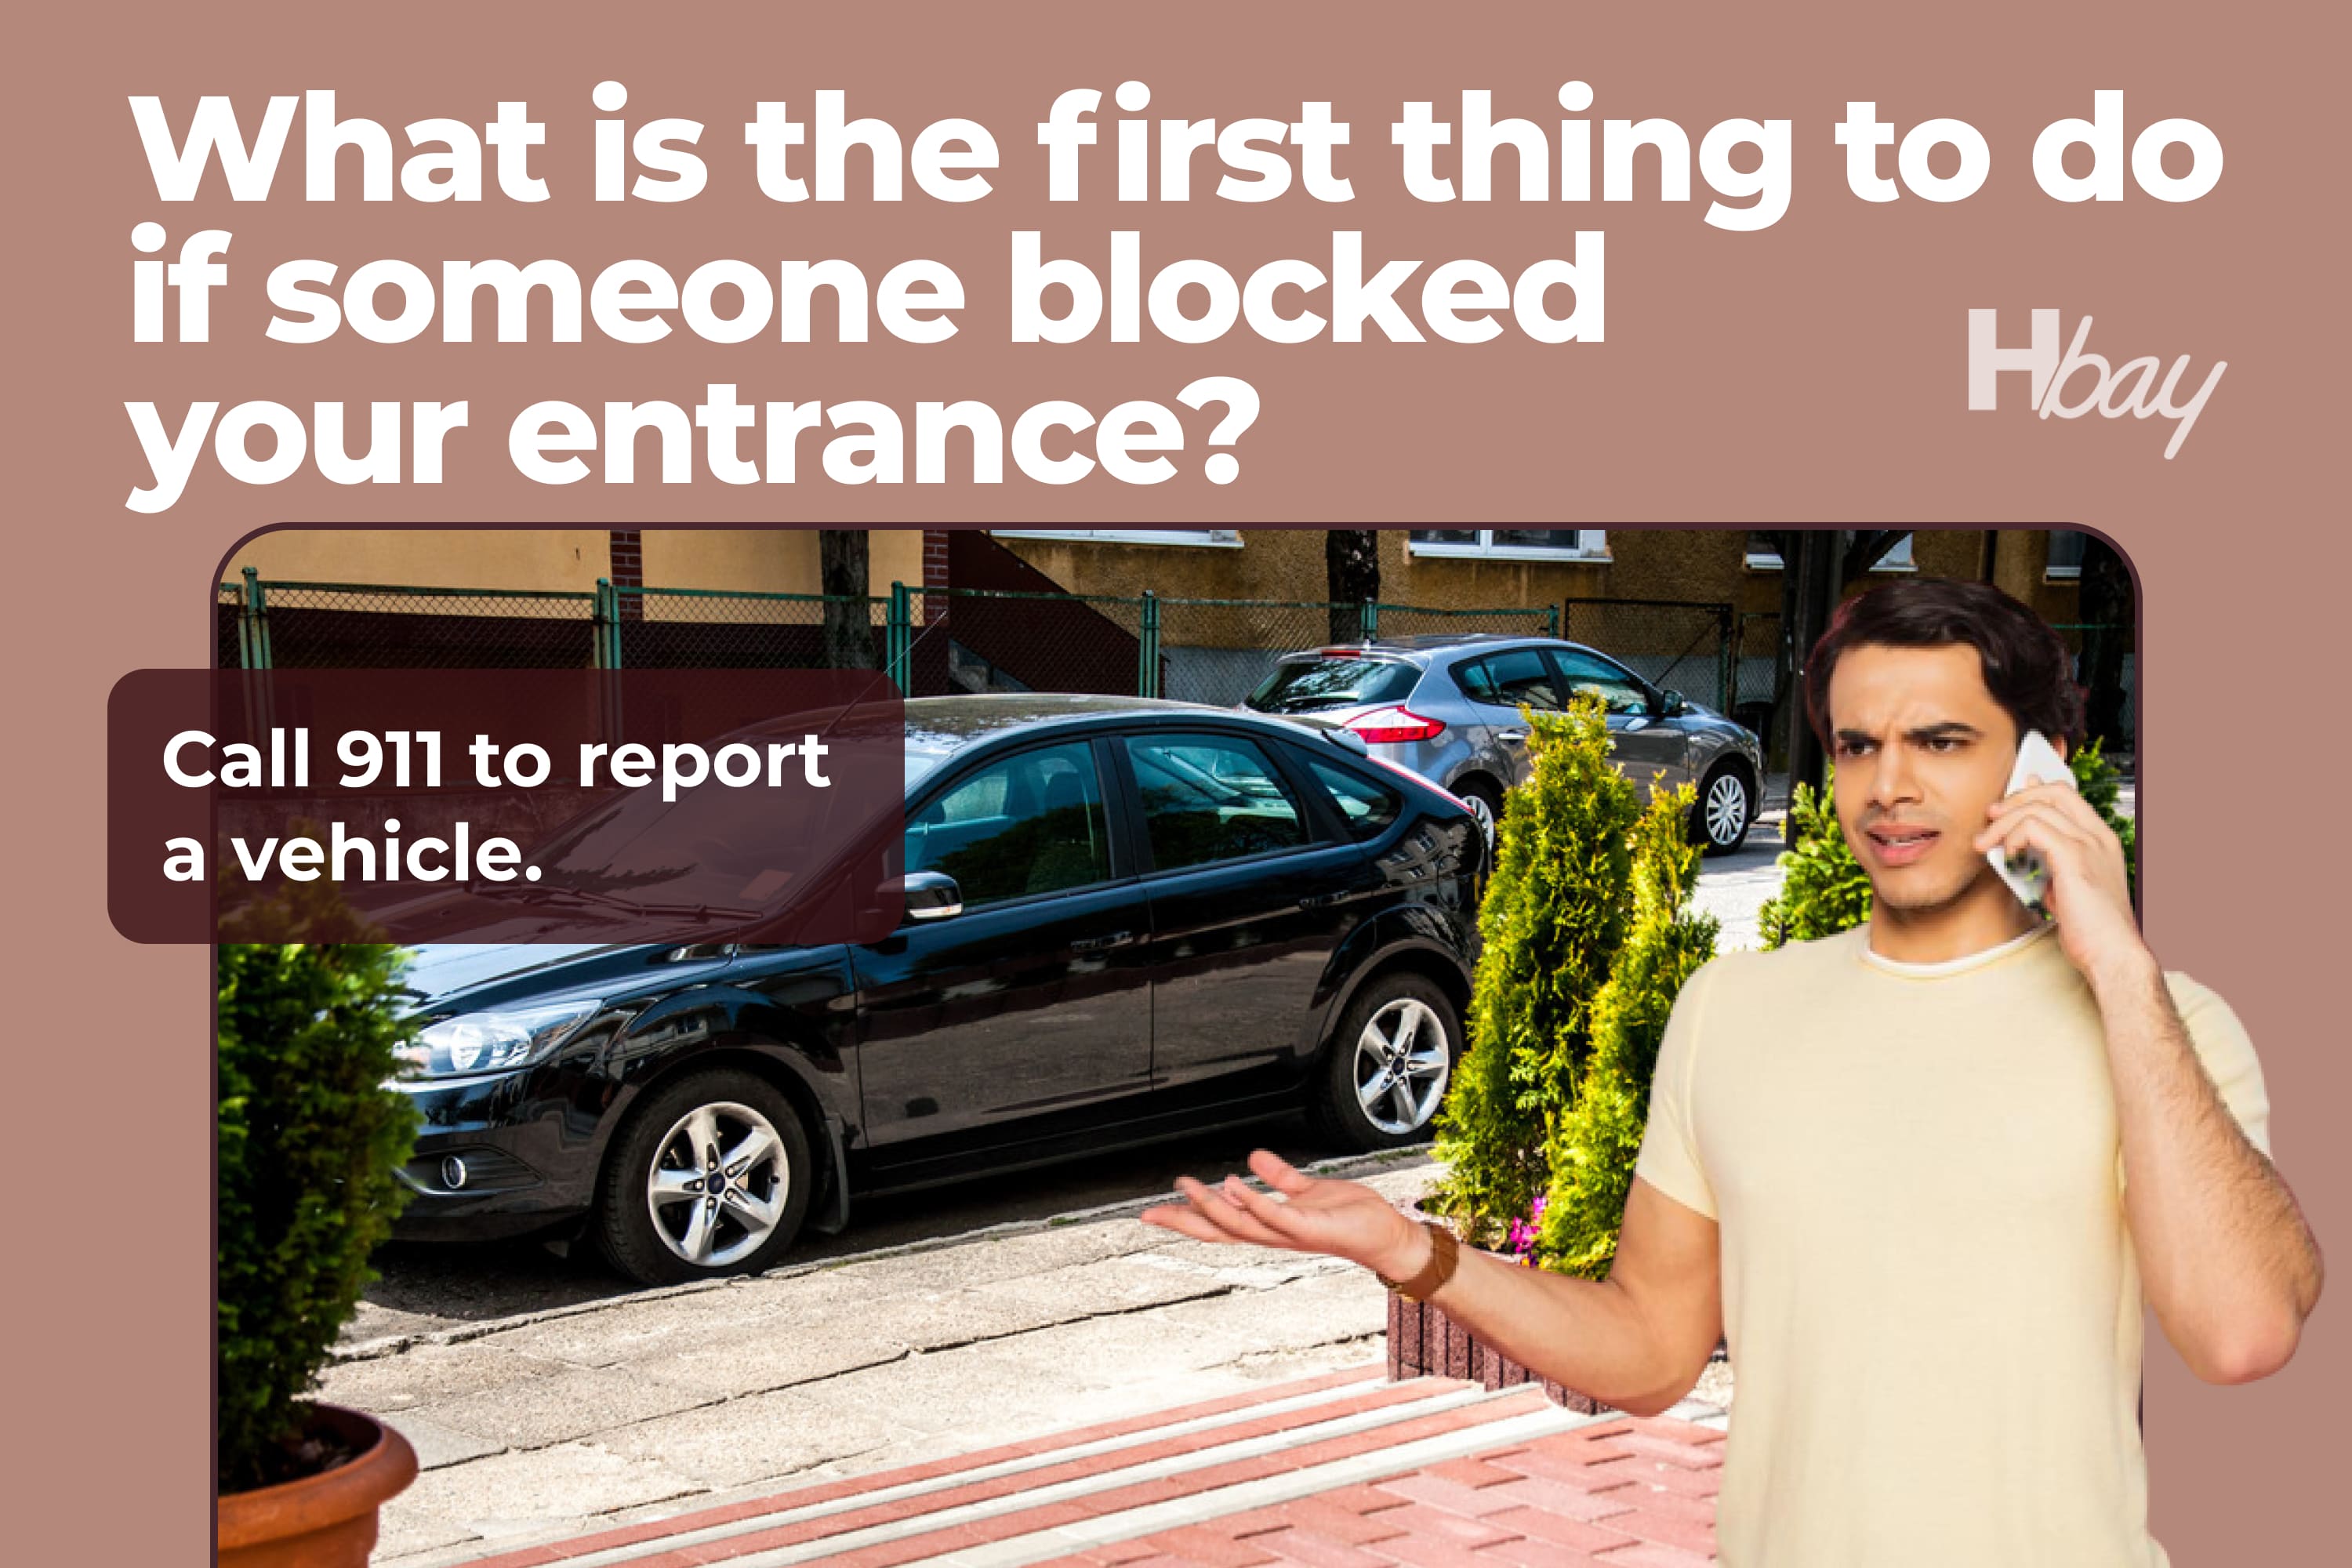 What is the first thing to do if someone blocked your entrance